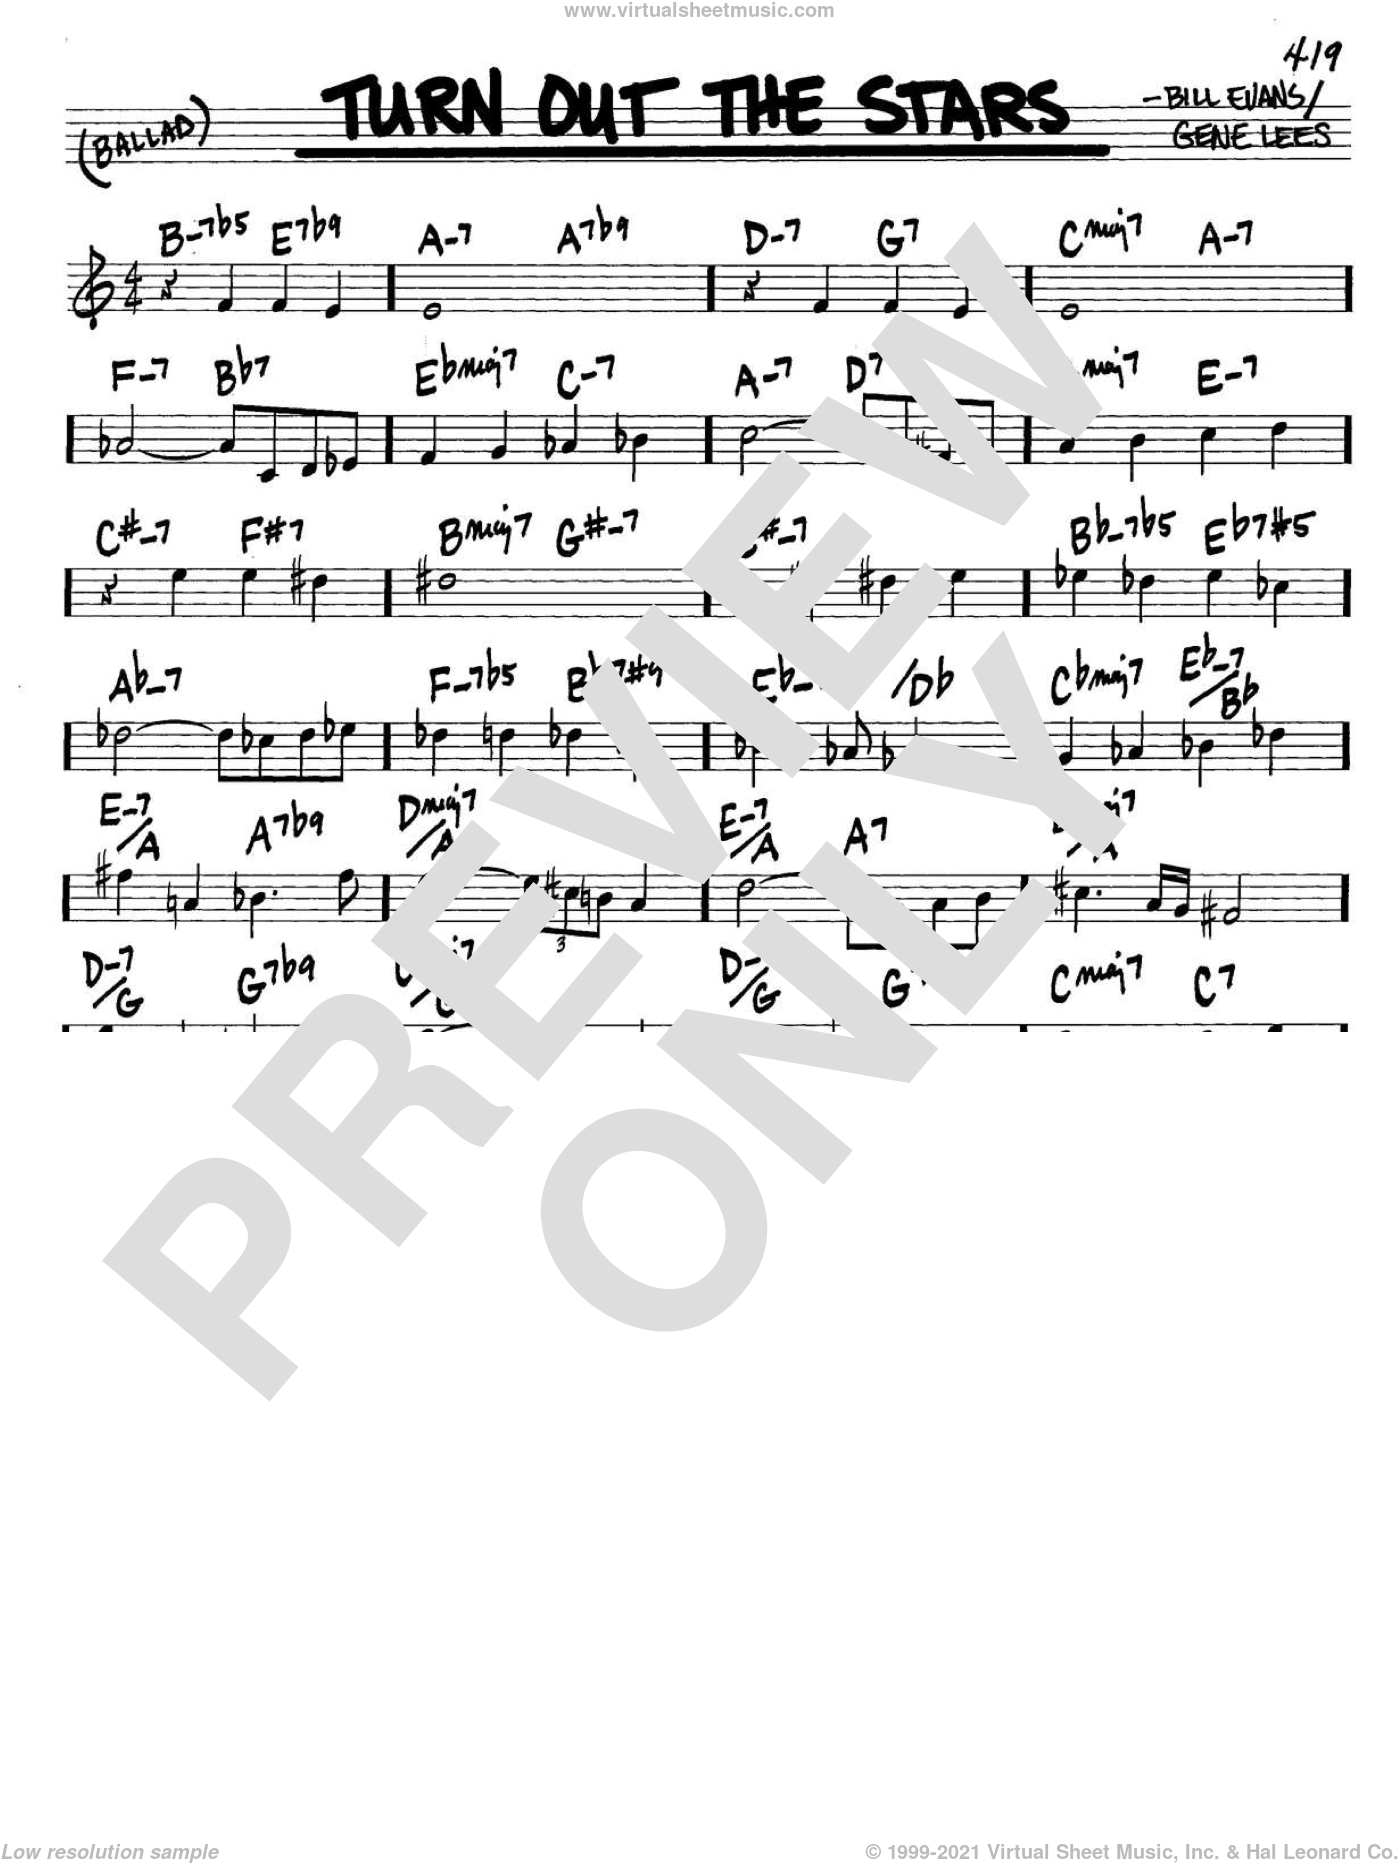 Evans - Turn Out The Stars sheet music (in C) (PDF)